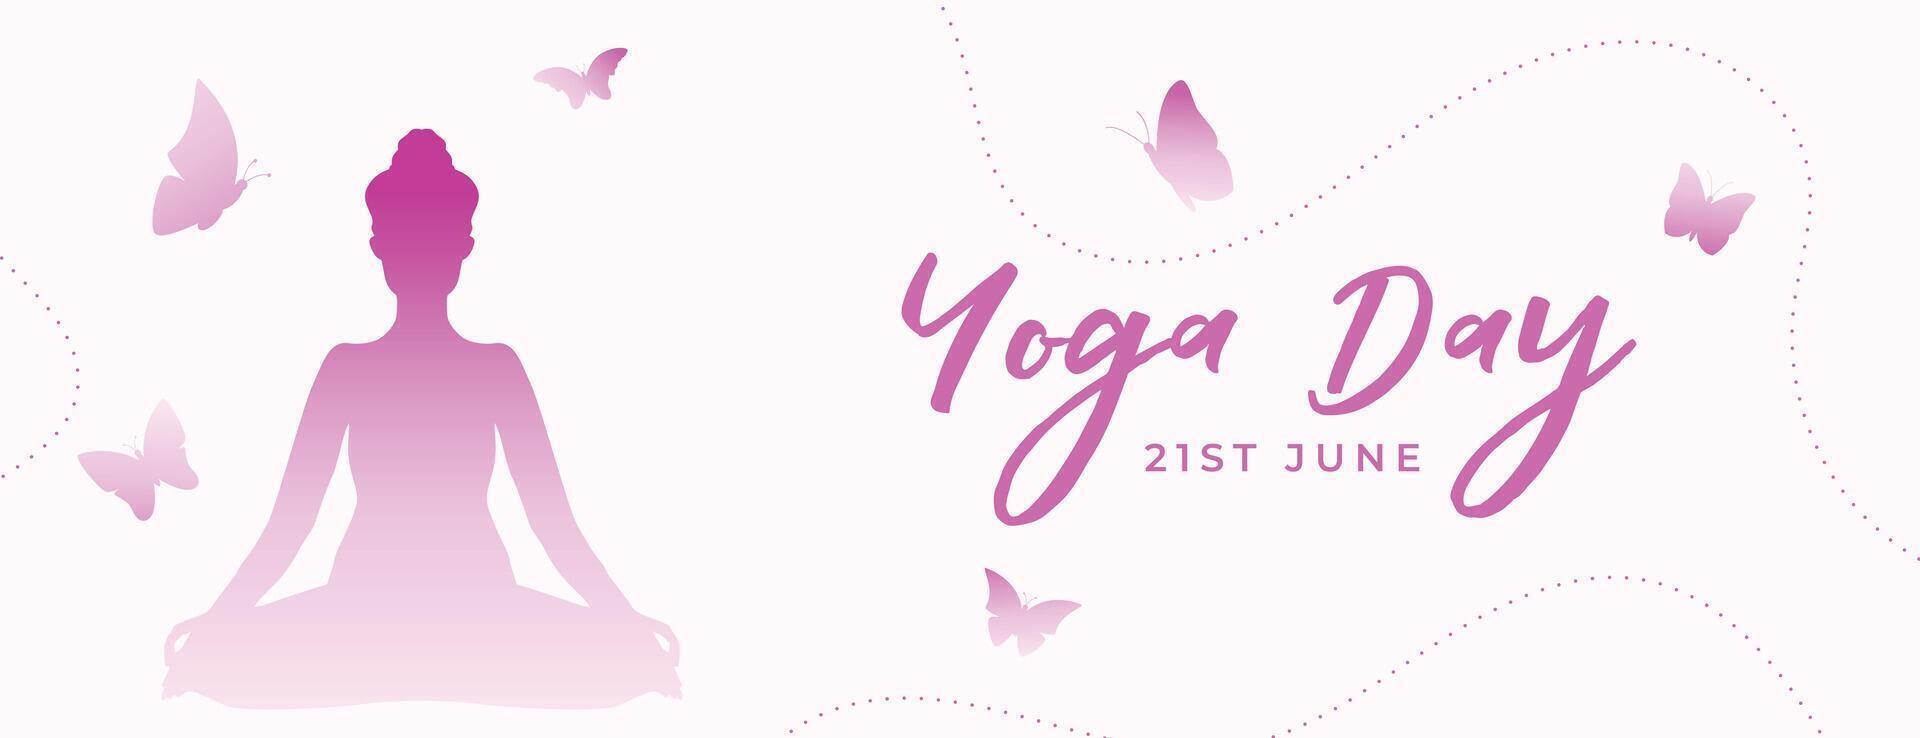 modern 21st june yoga day event banner with cute butterfly design vector